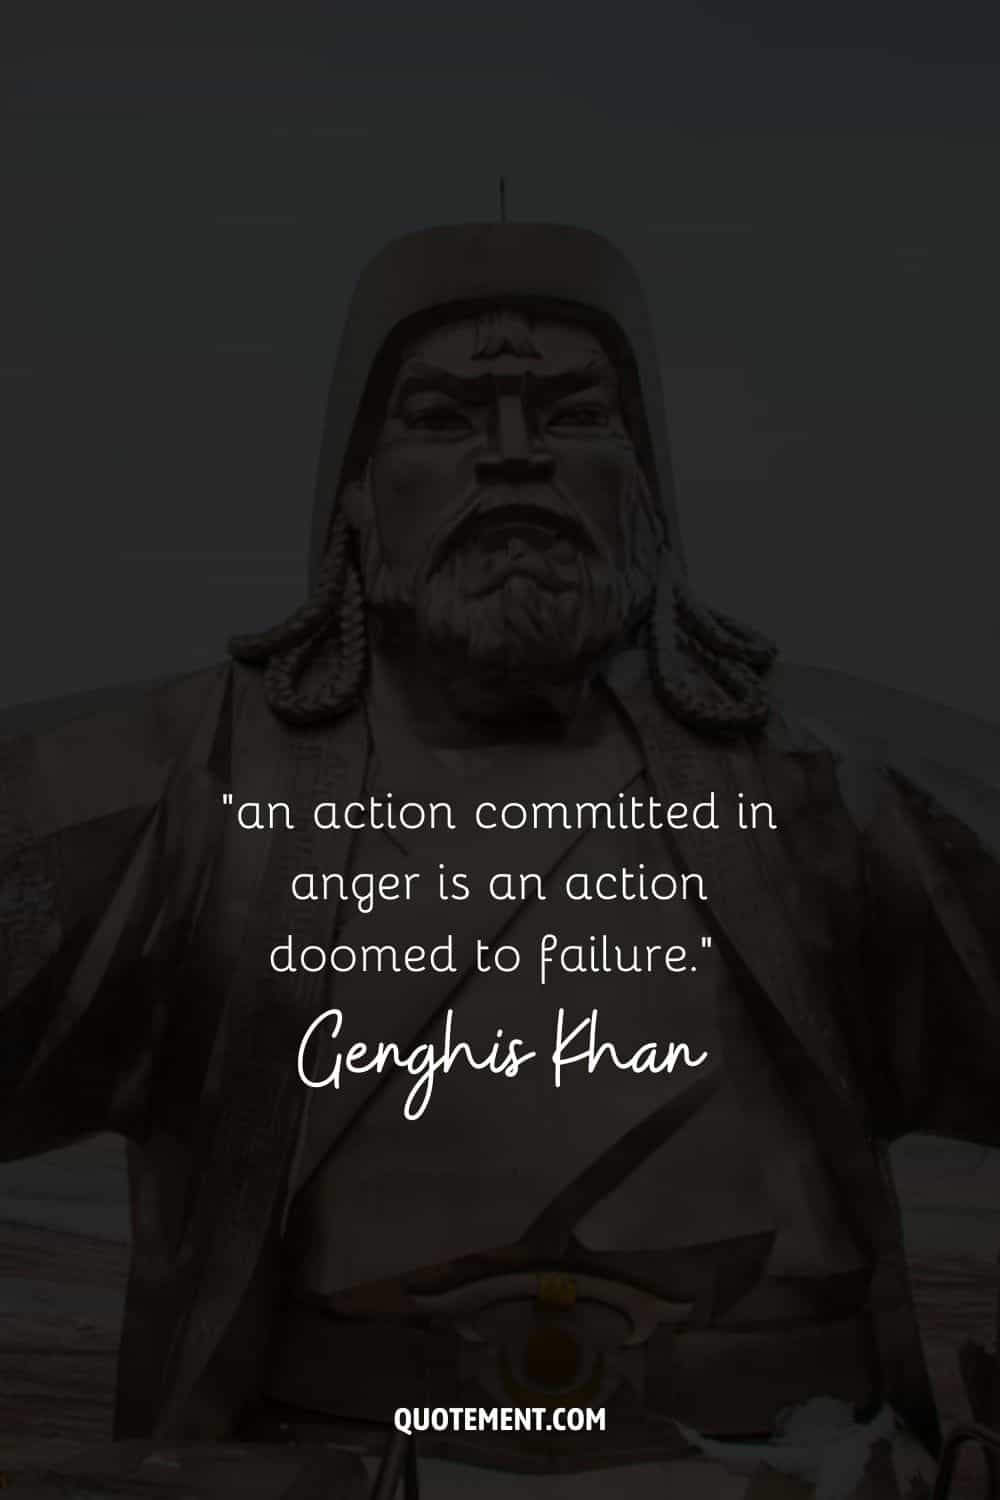 an action committed in anger is an action doomed to failure